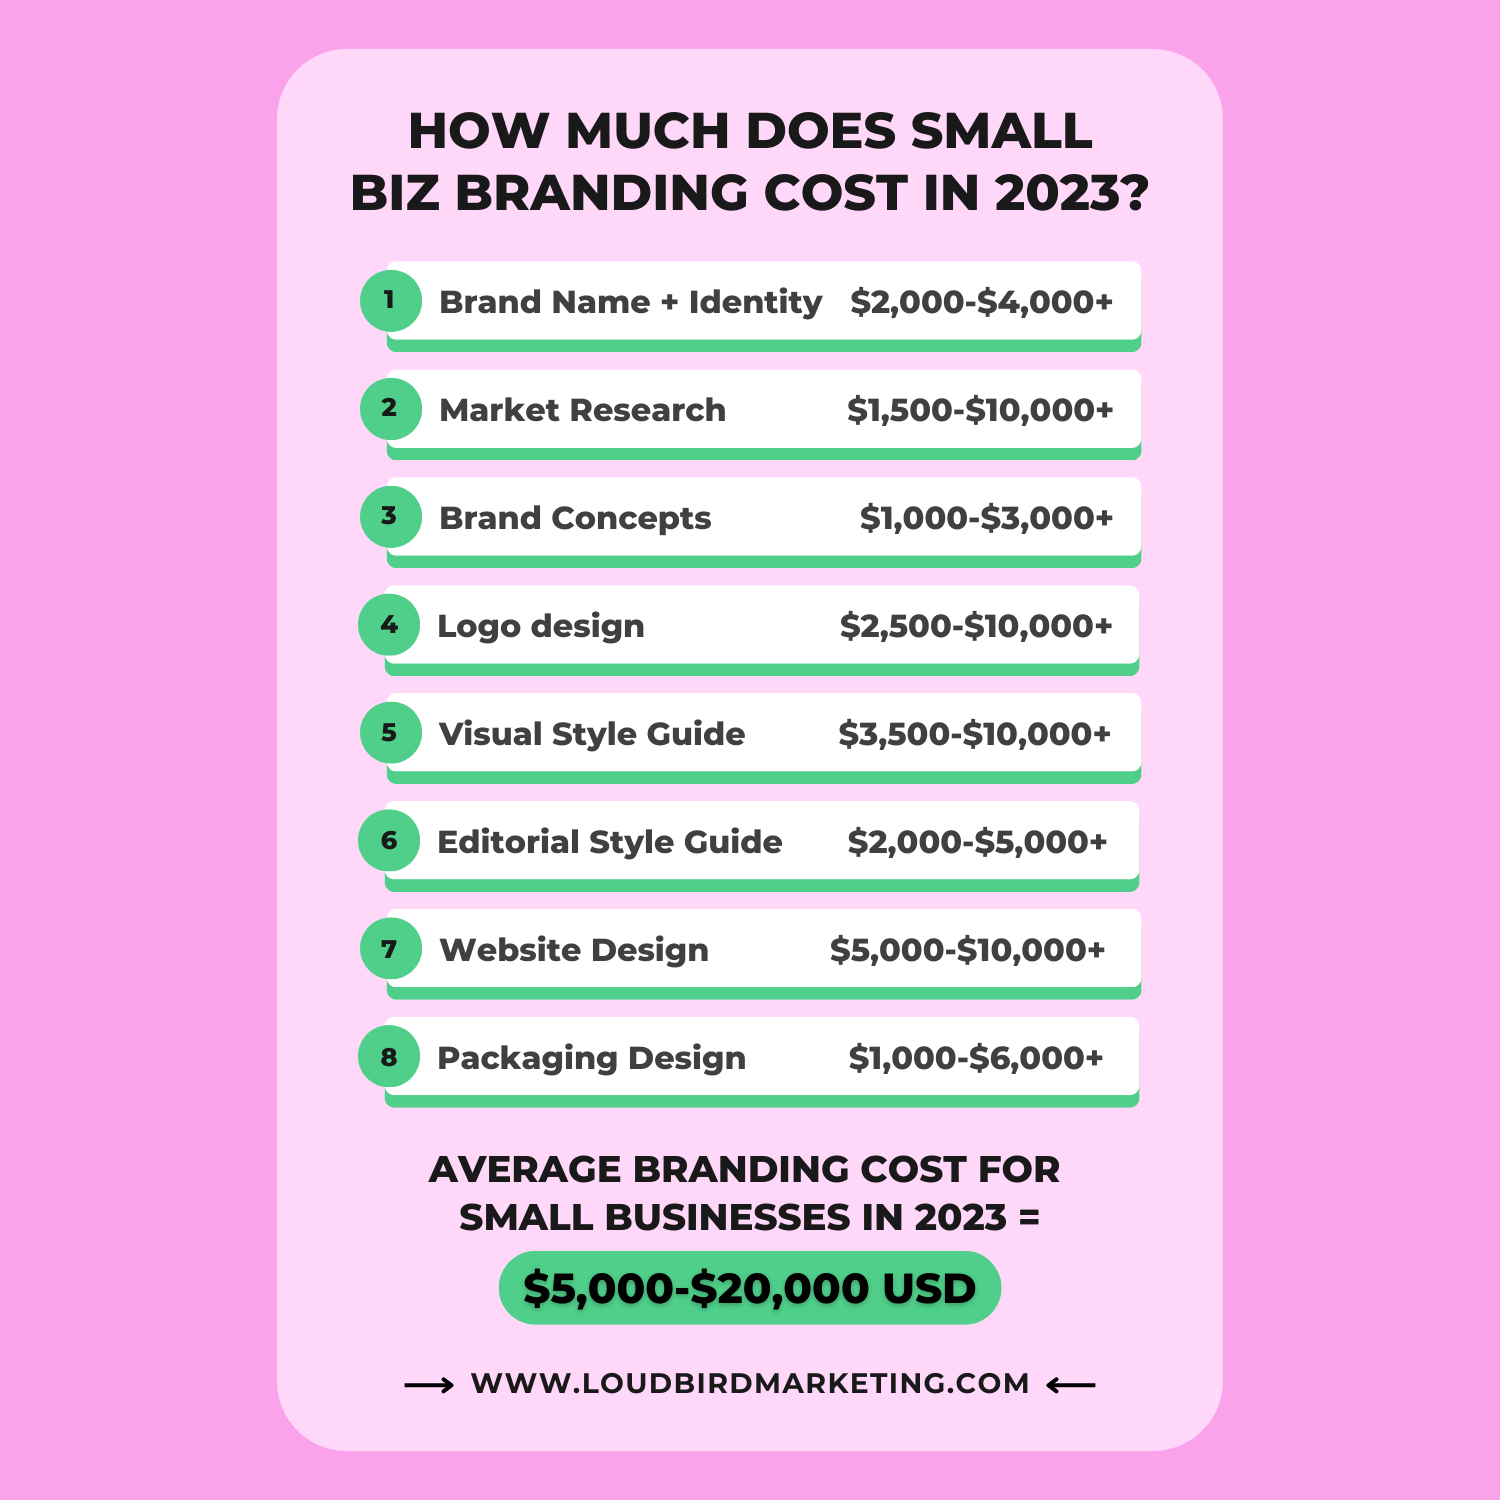 how much does small business branding cost in 2023 infographic www.loudbirdmarketing.com